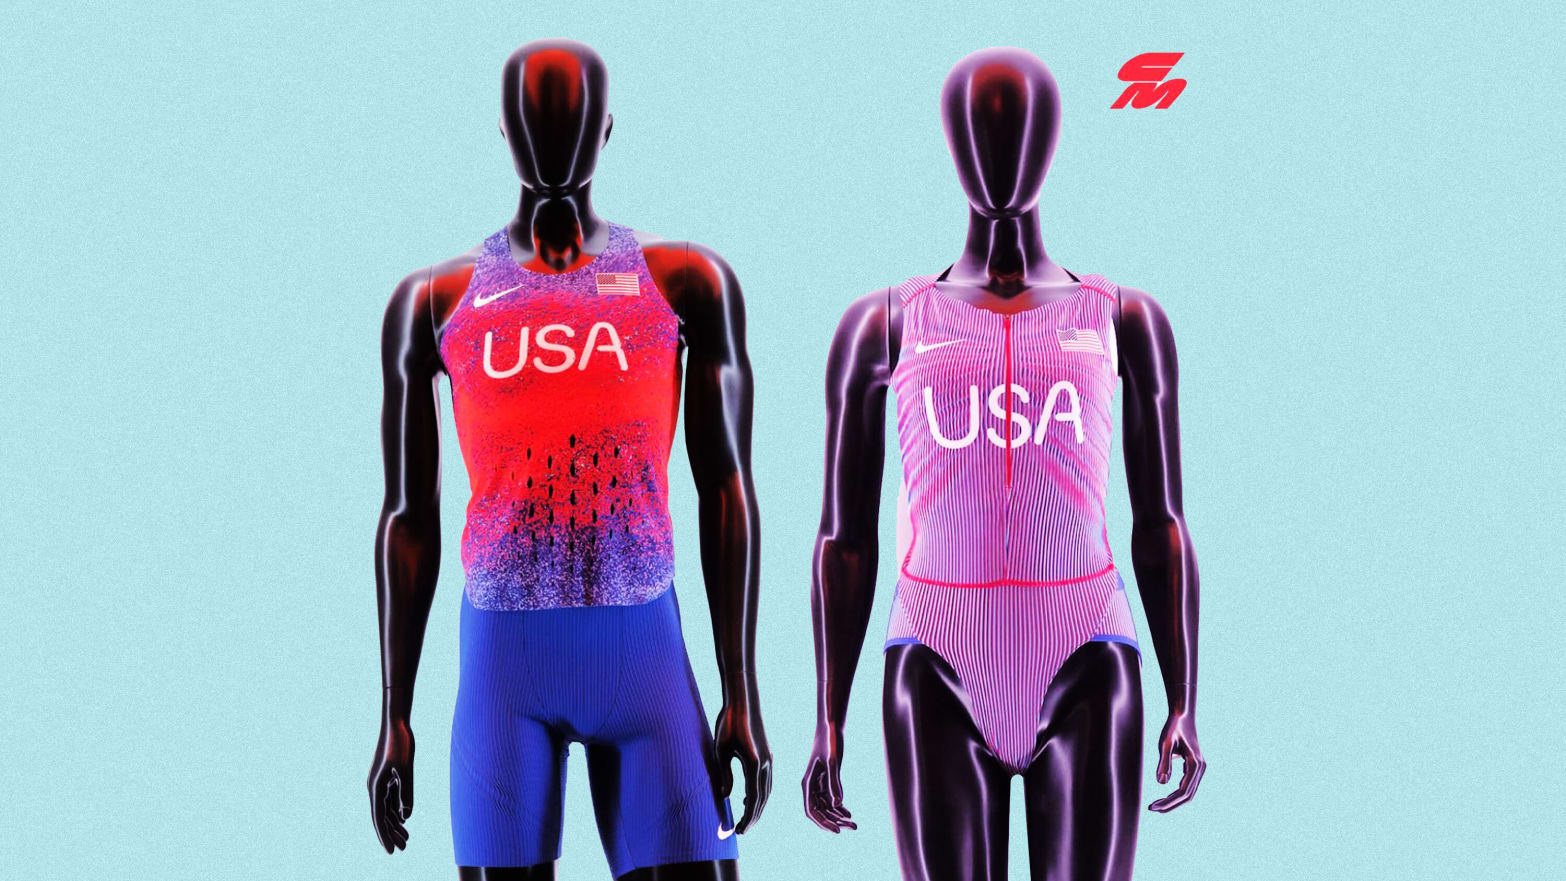 CITIUS MAG posted the first look of the Track & Field Uniforms for the 2024 Summer Olympics 
